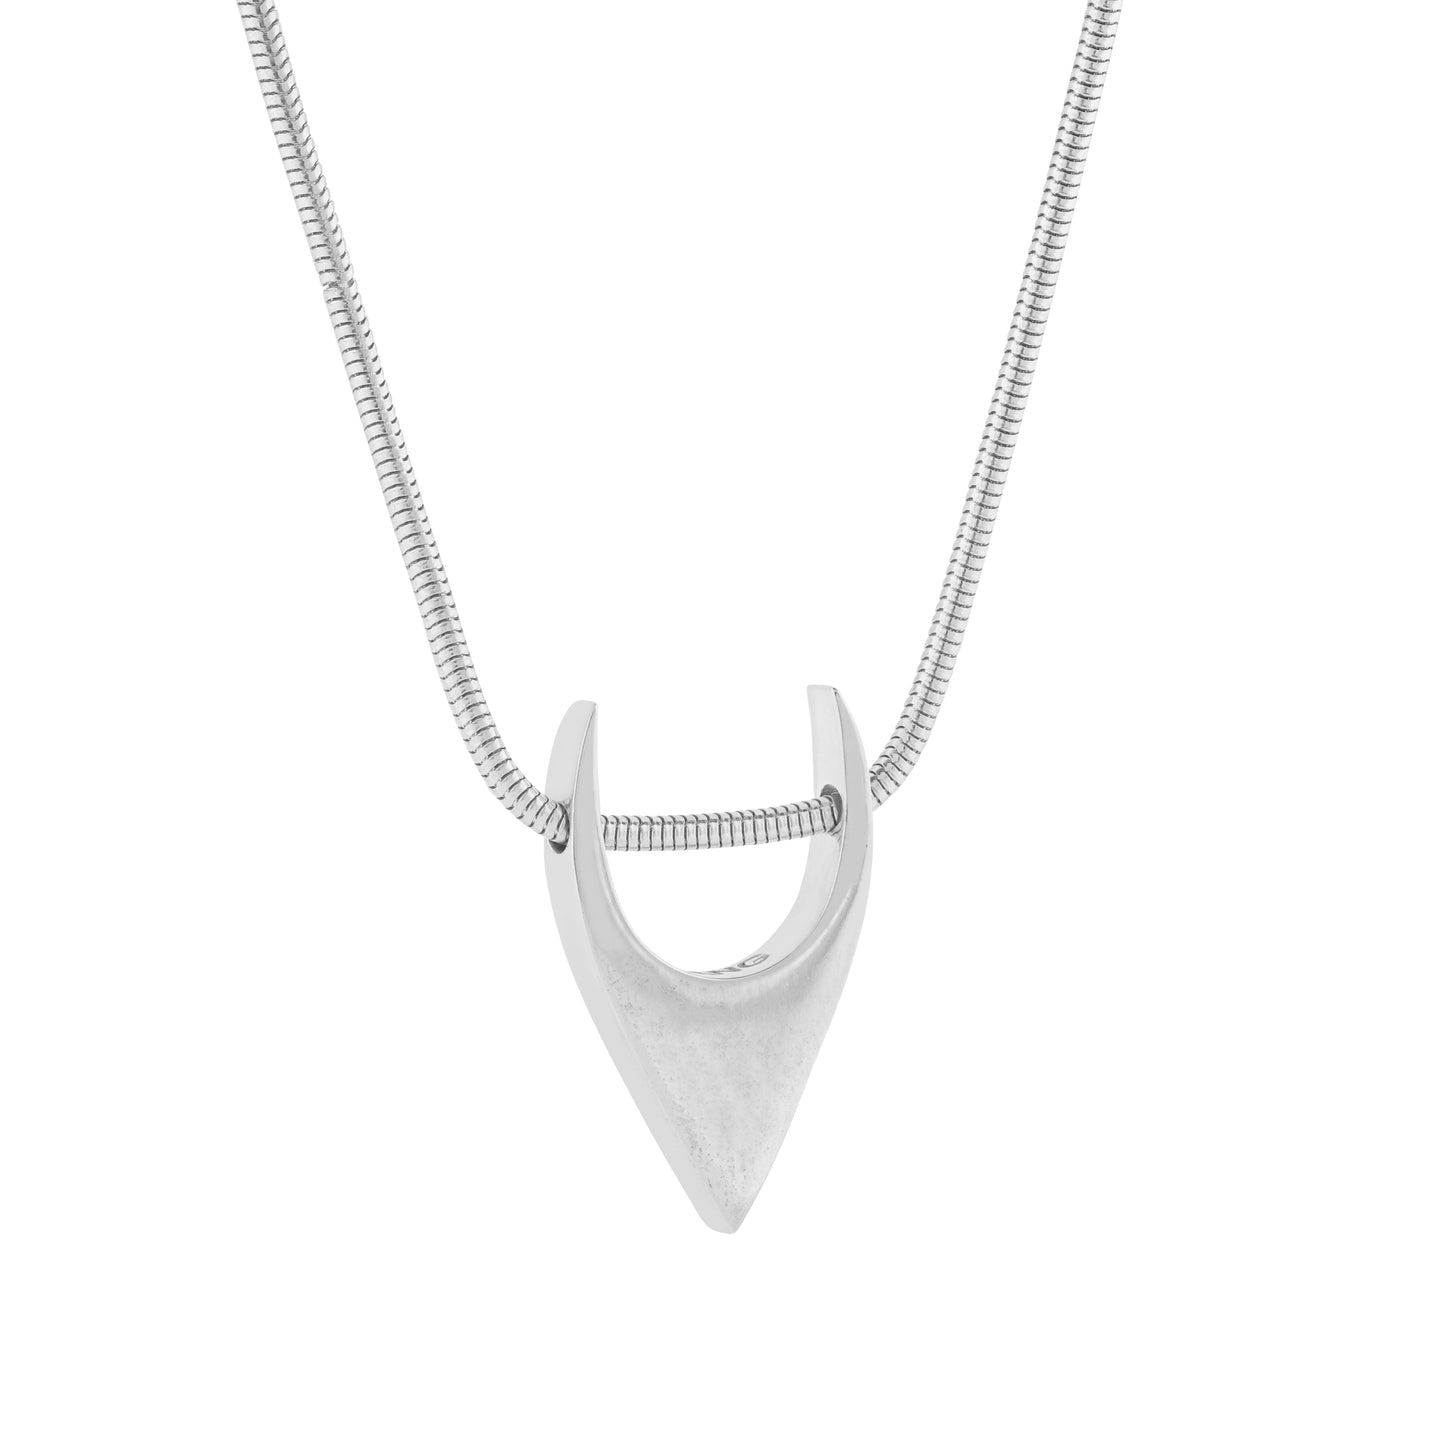 FANG: FANG Logo Snack Chain Necklace in Sterling Silver